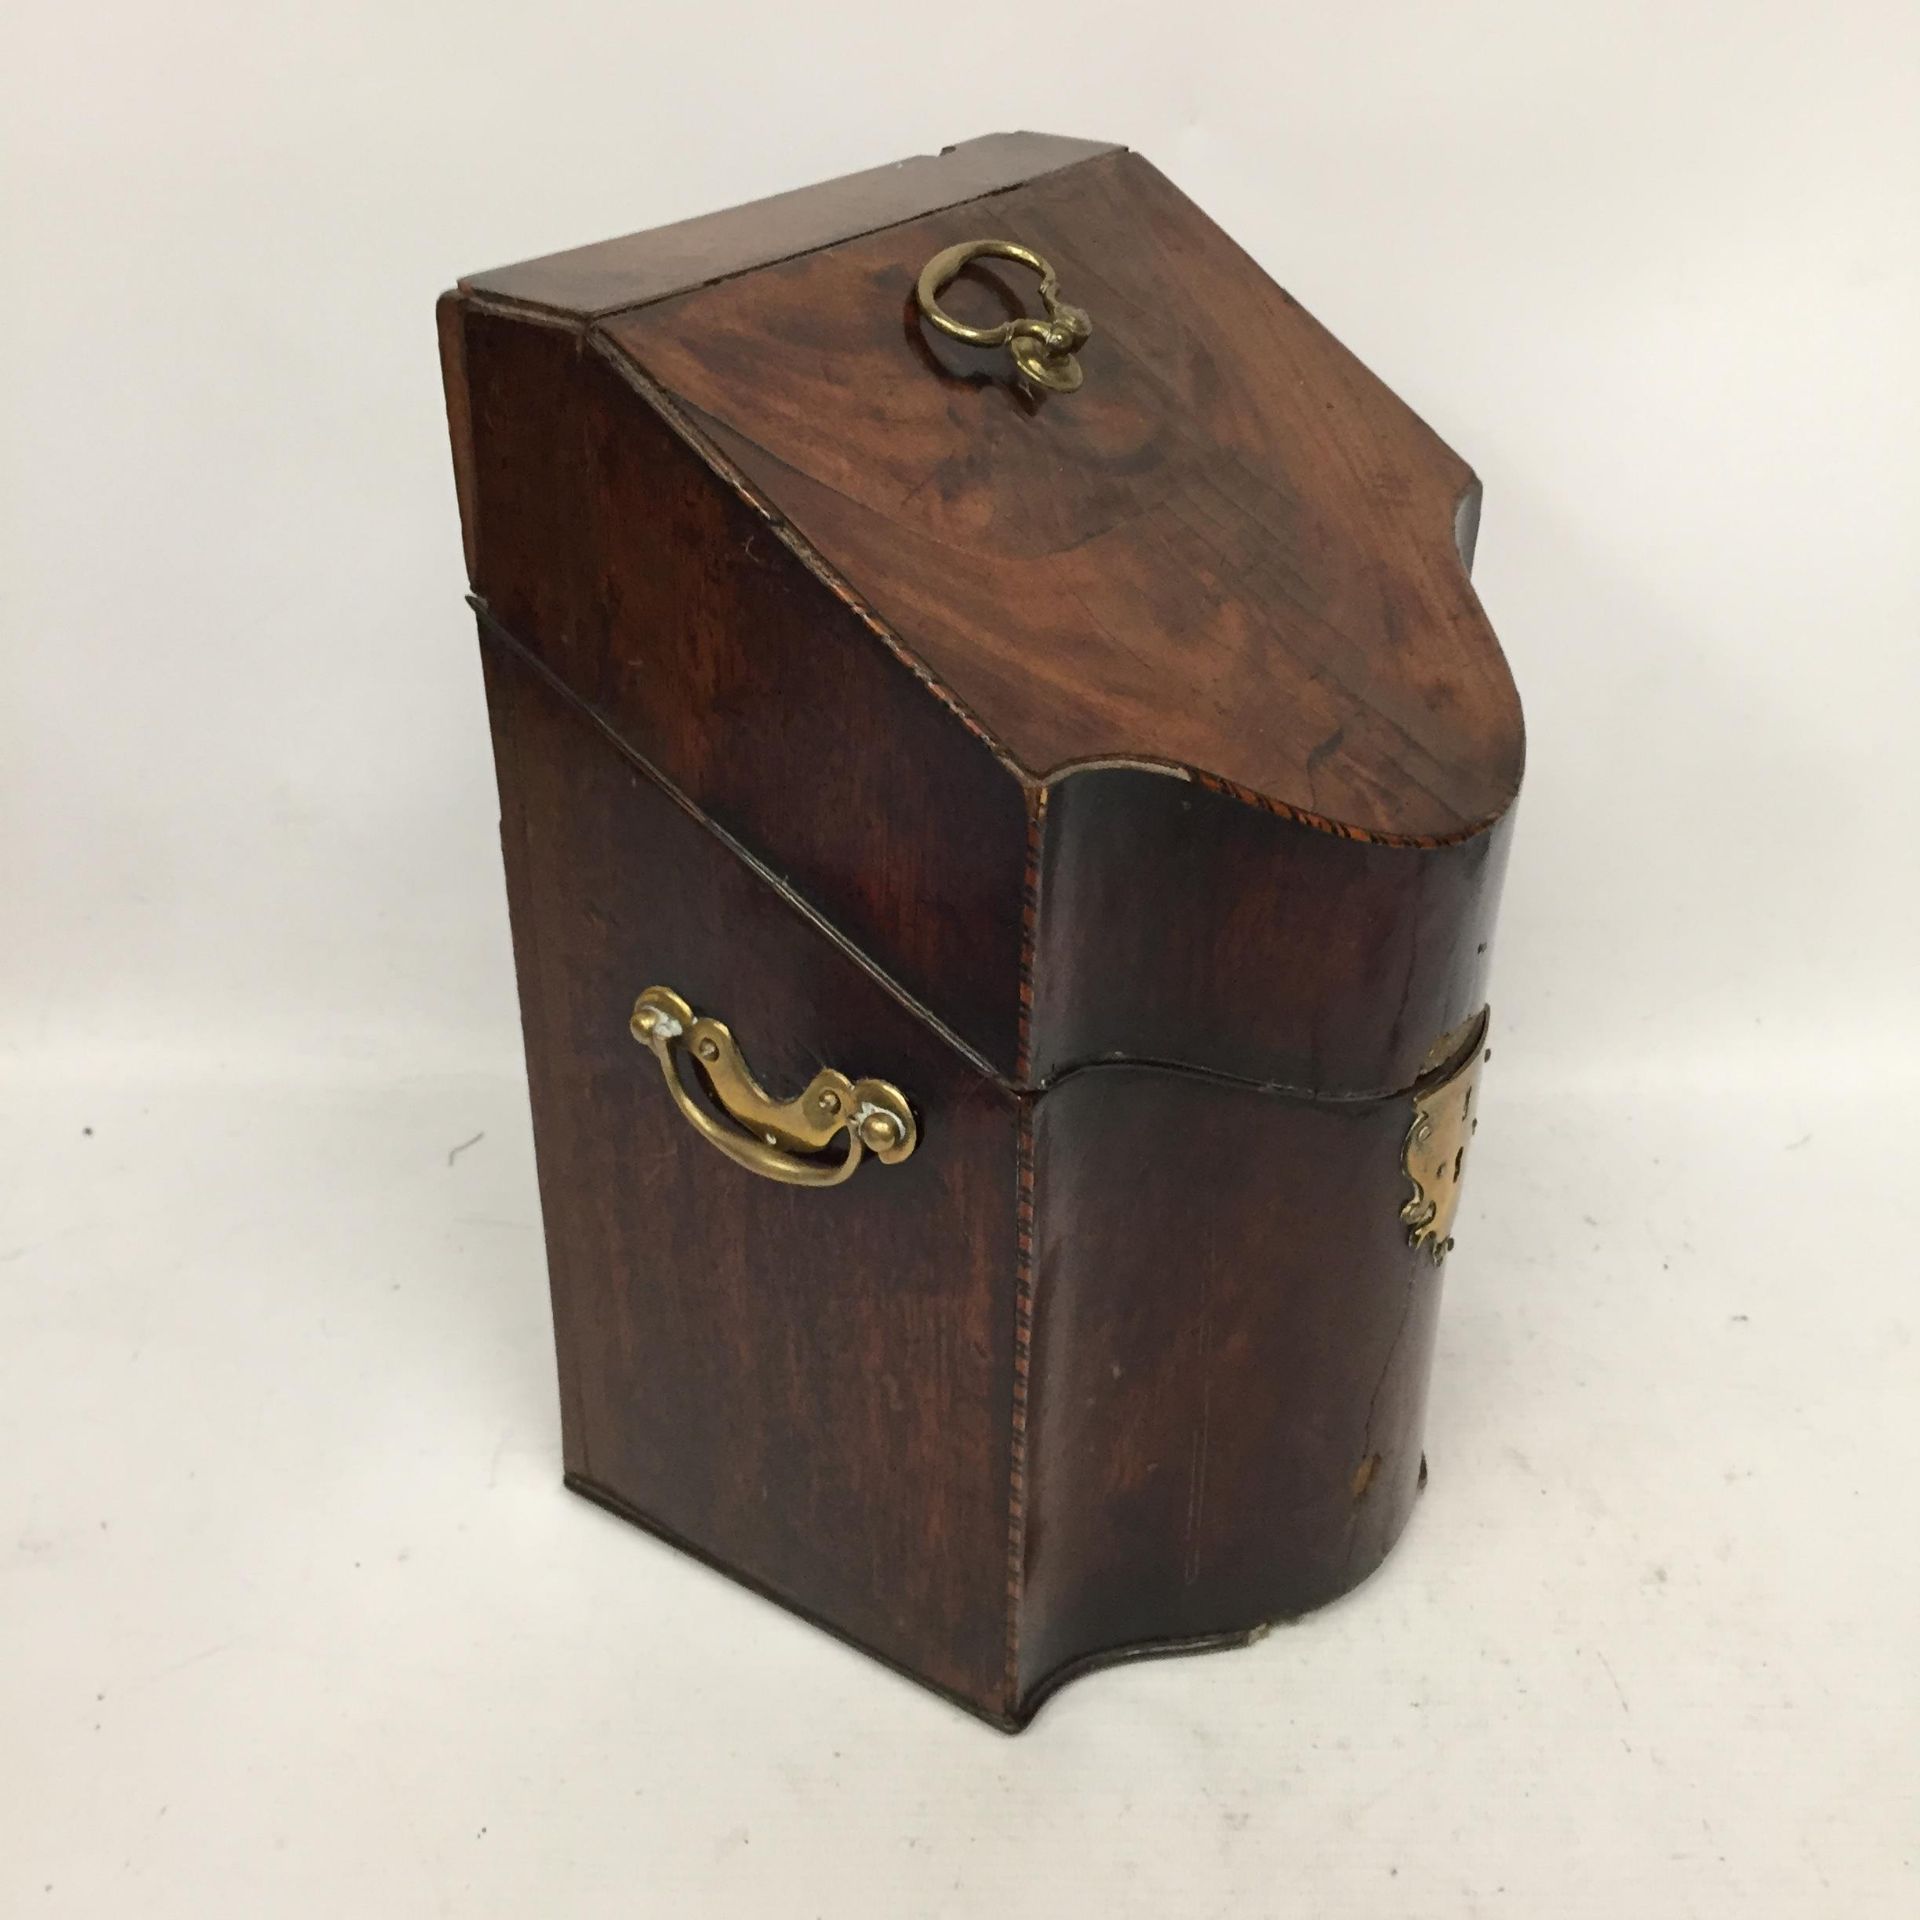 A GEORGIAN MAHOGANY KNIFE BOX WITH BRASS FITTINGS - Image 3 of 4